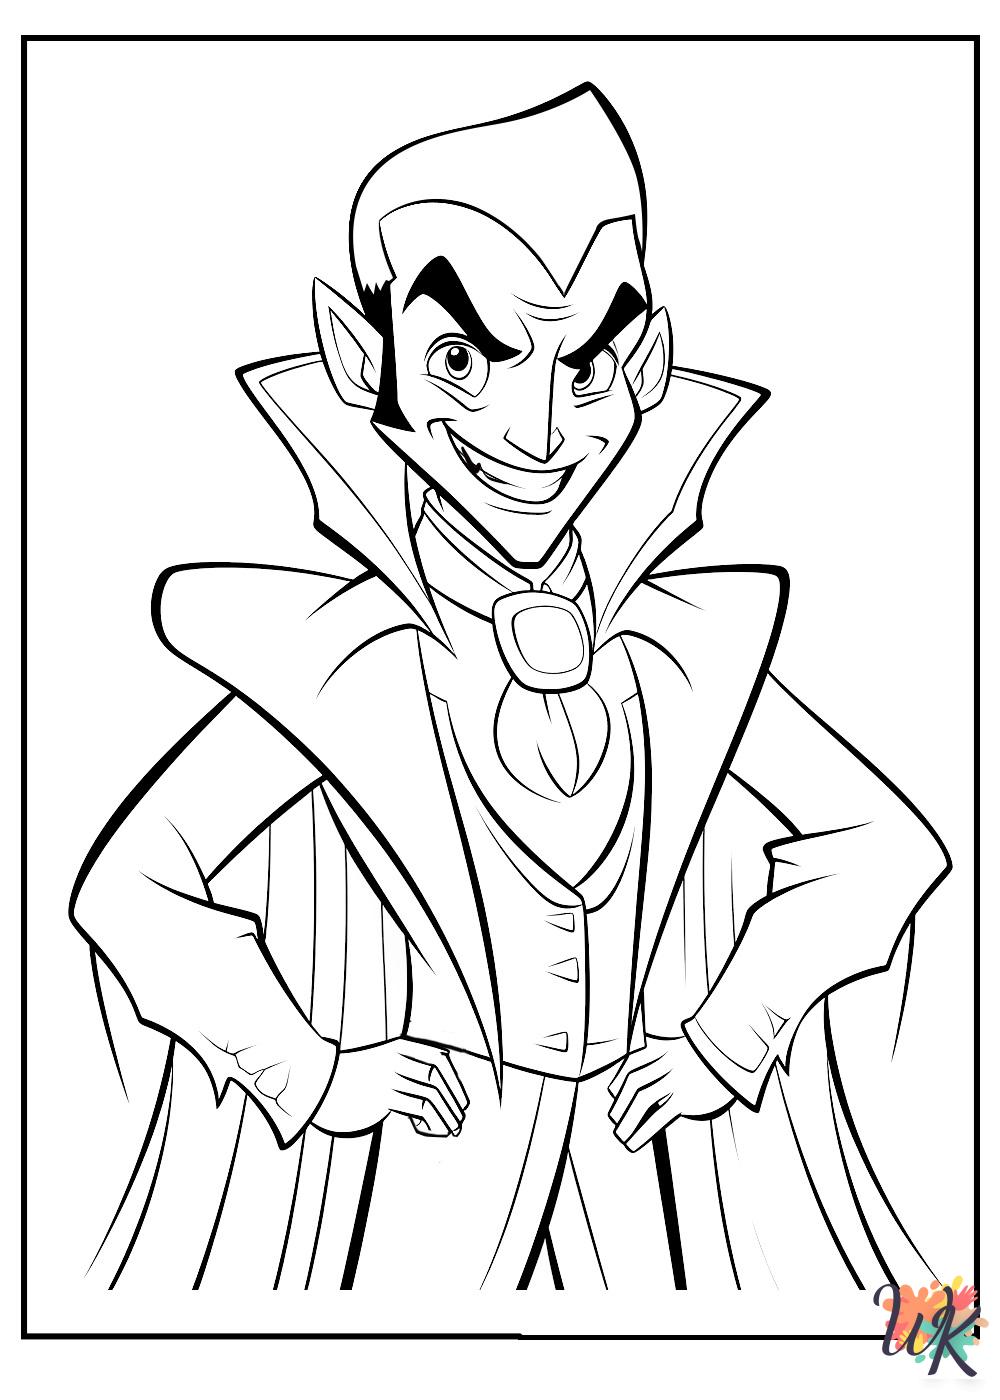 Dracula coloring book pages